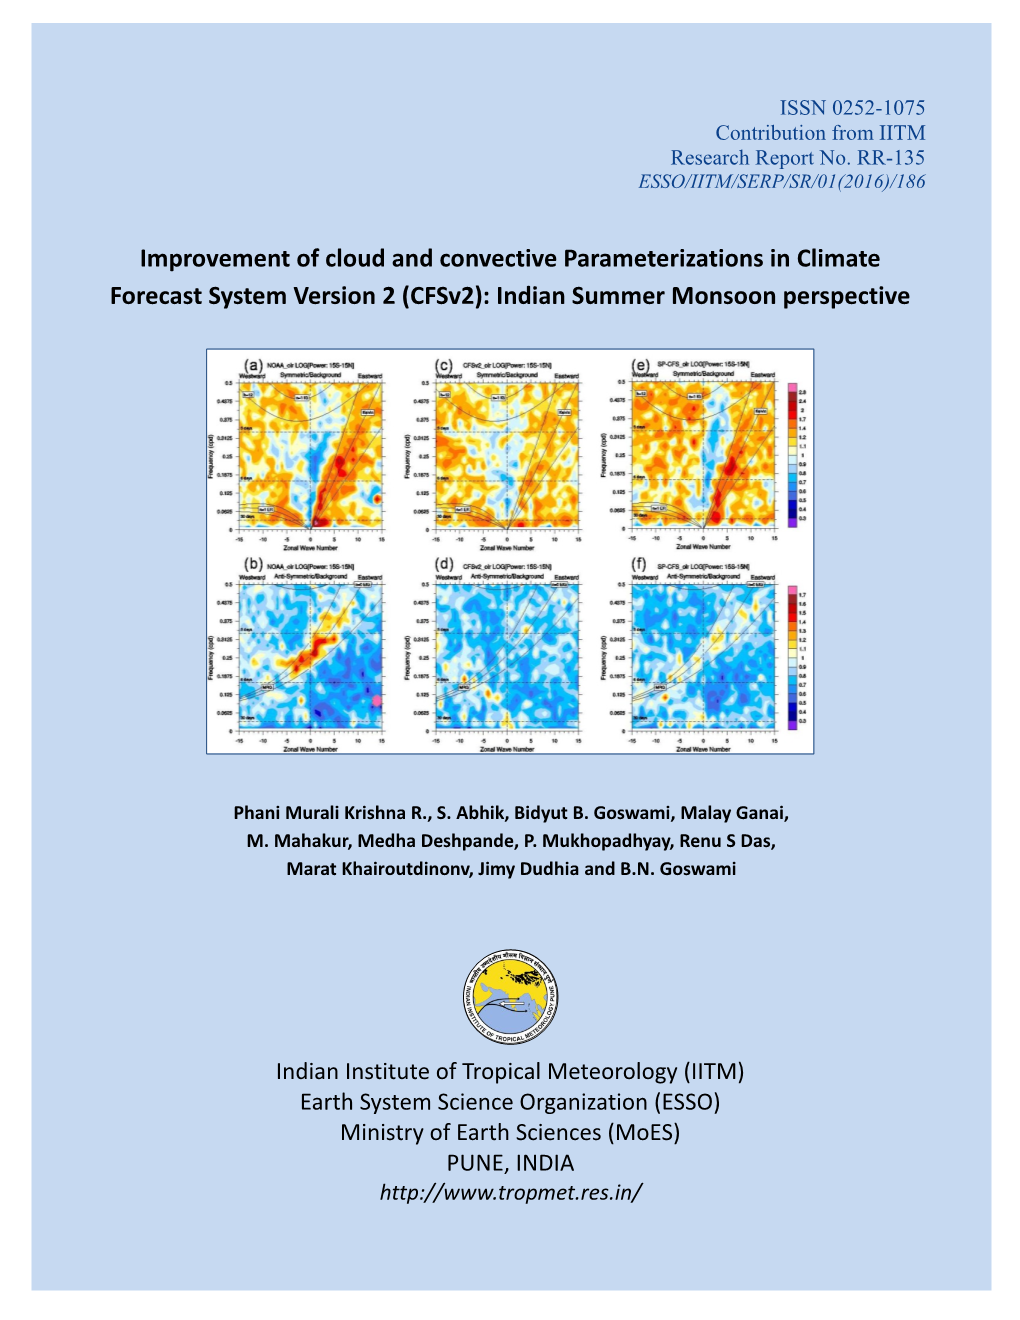 Improvement of Cloud and Convective Parameterizations in Climate Forecast System Version 2 (Cfsv2): Indian Summer Monsoon Perspective